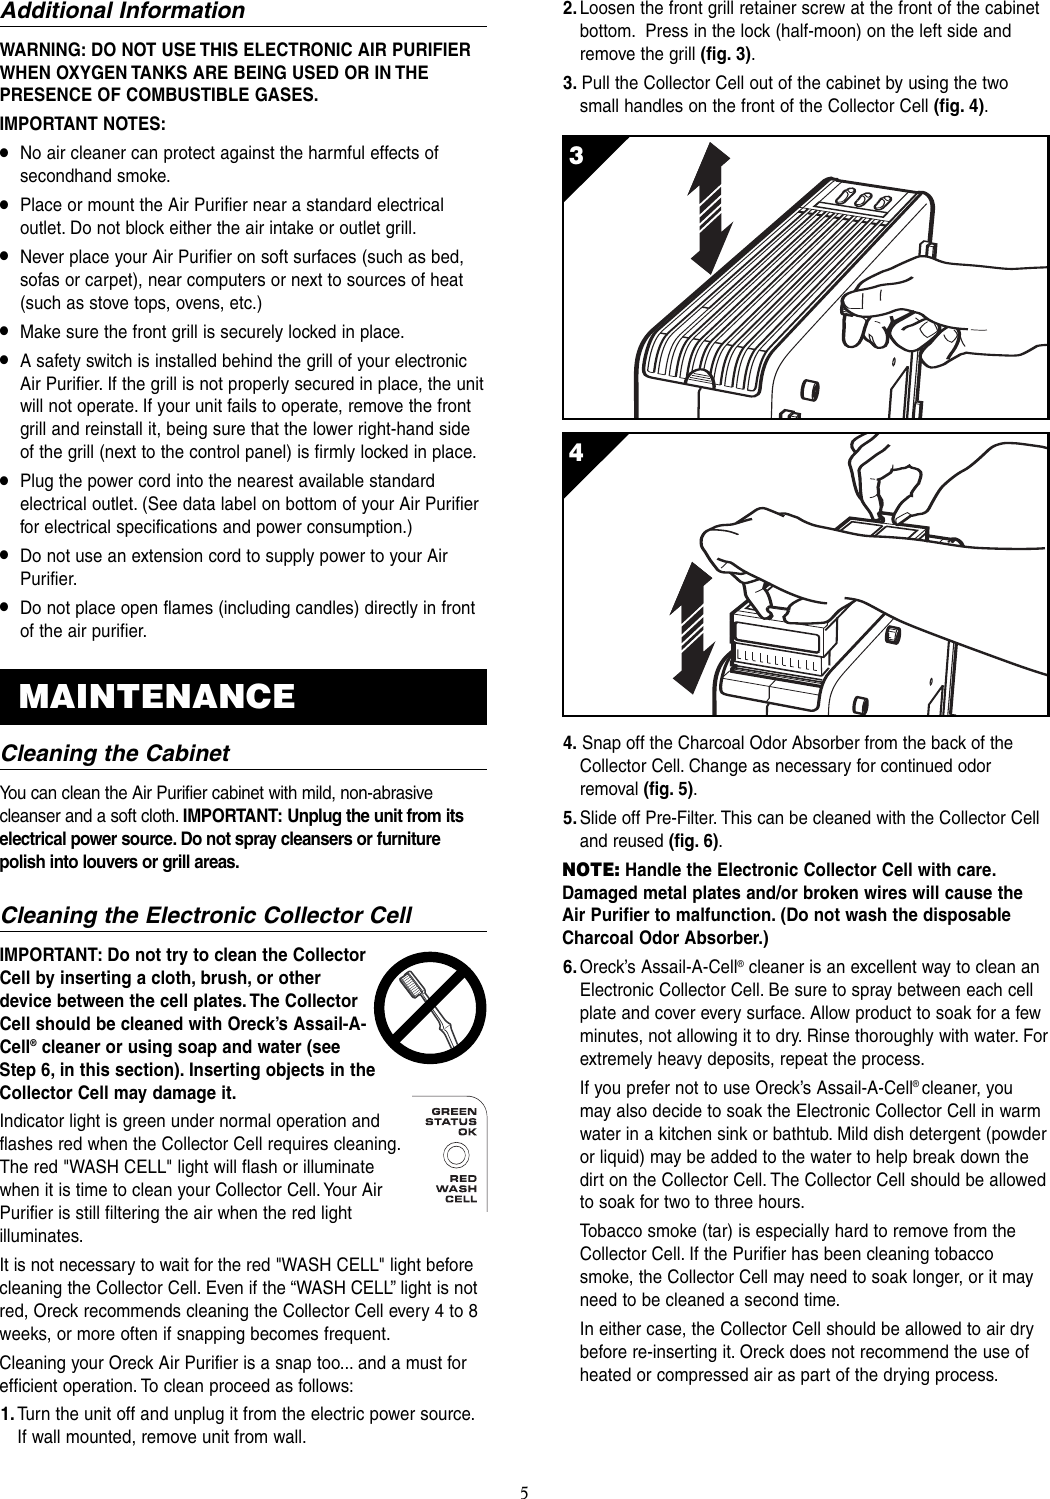 Page 7 of 12 - Oreck Oreck-3323-8889Revk-Users-Manual- Air 8 Manual Rev B  Oreck-3323-8889revk-users-manual